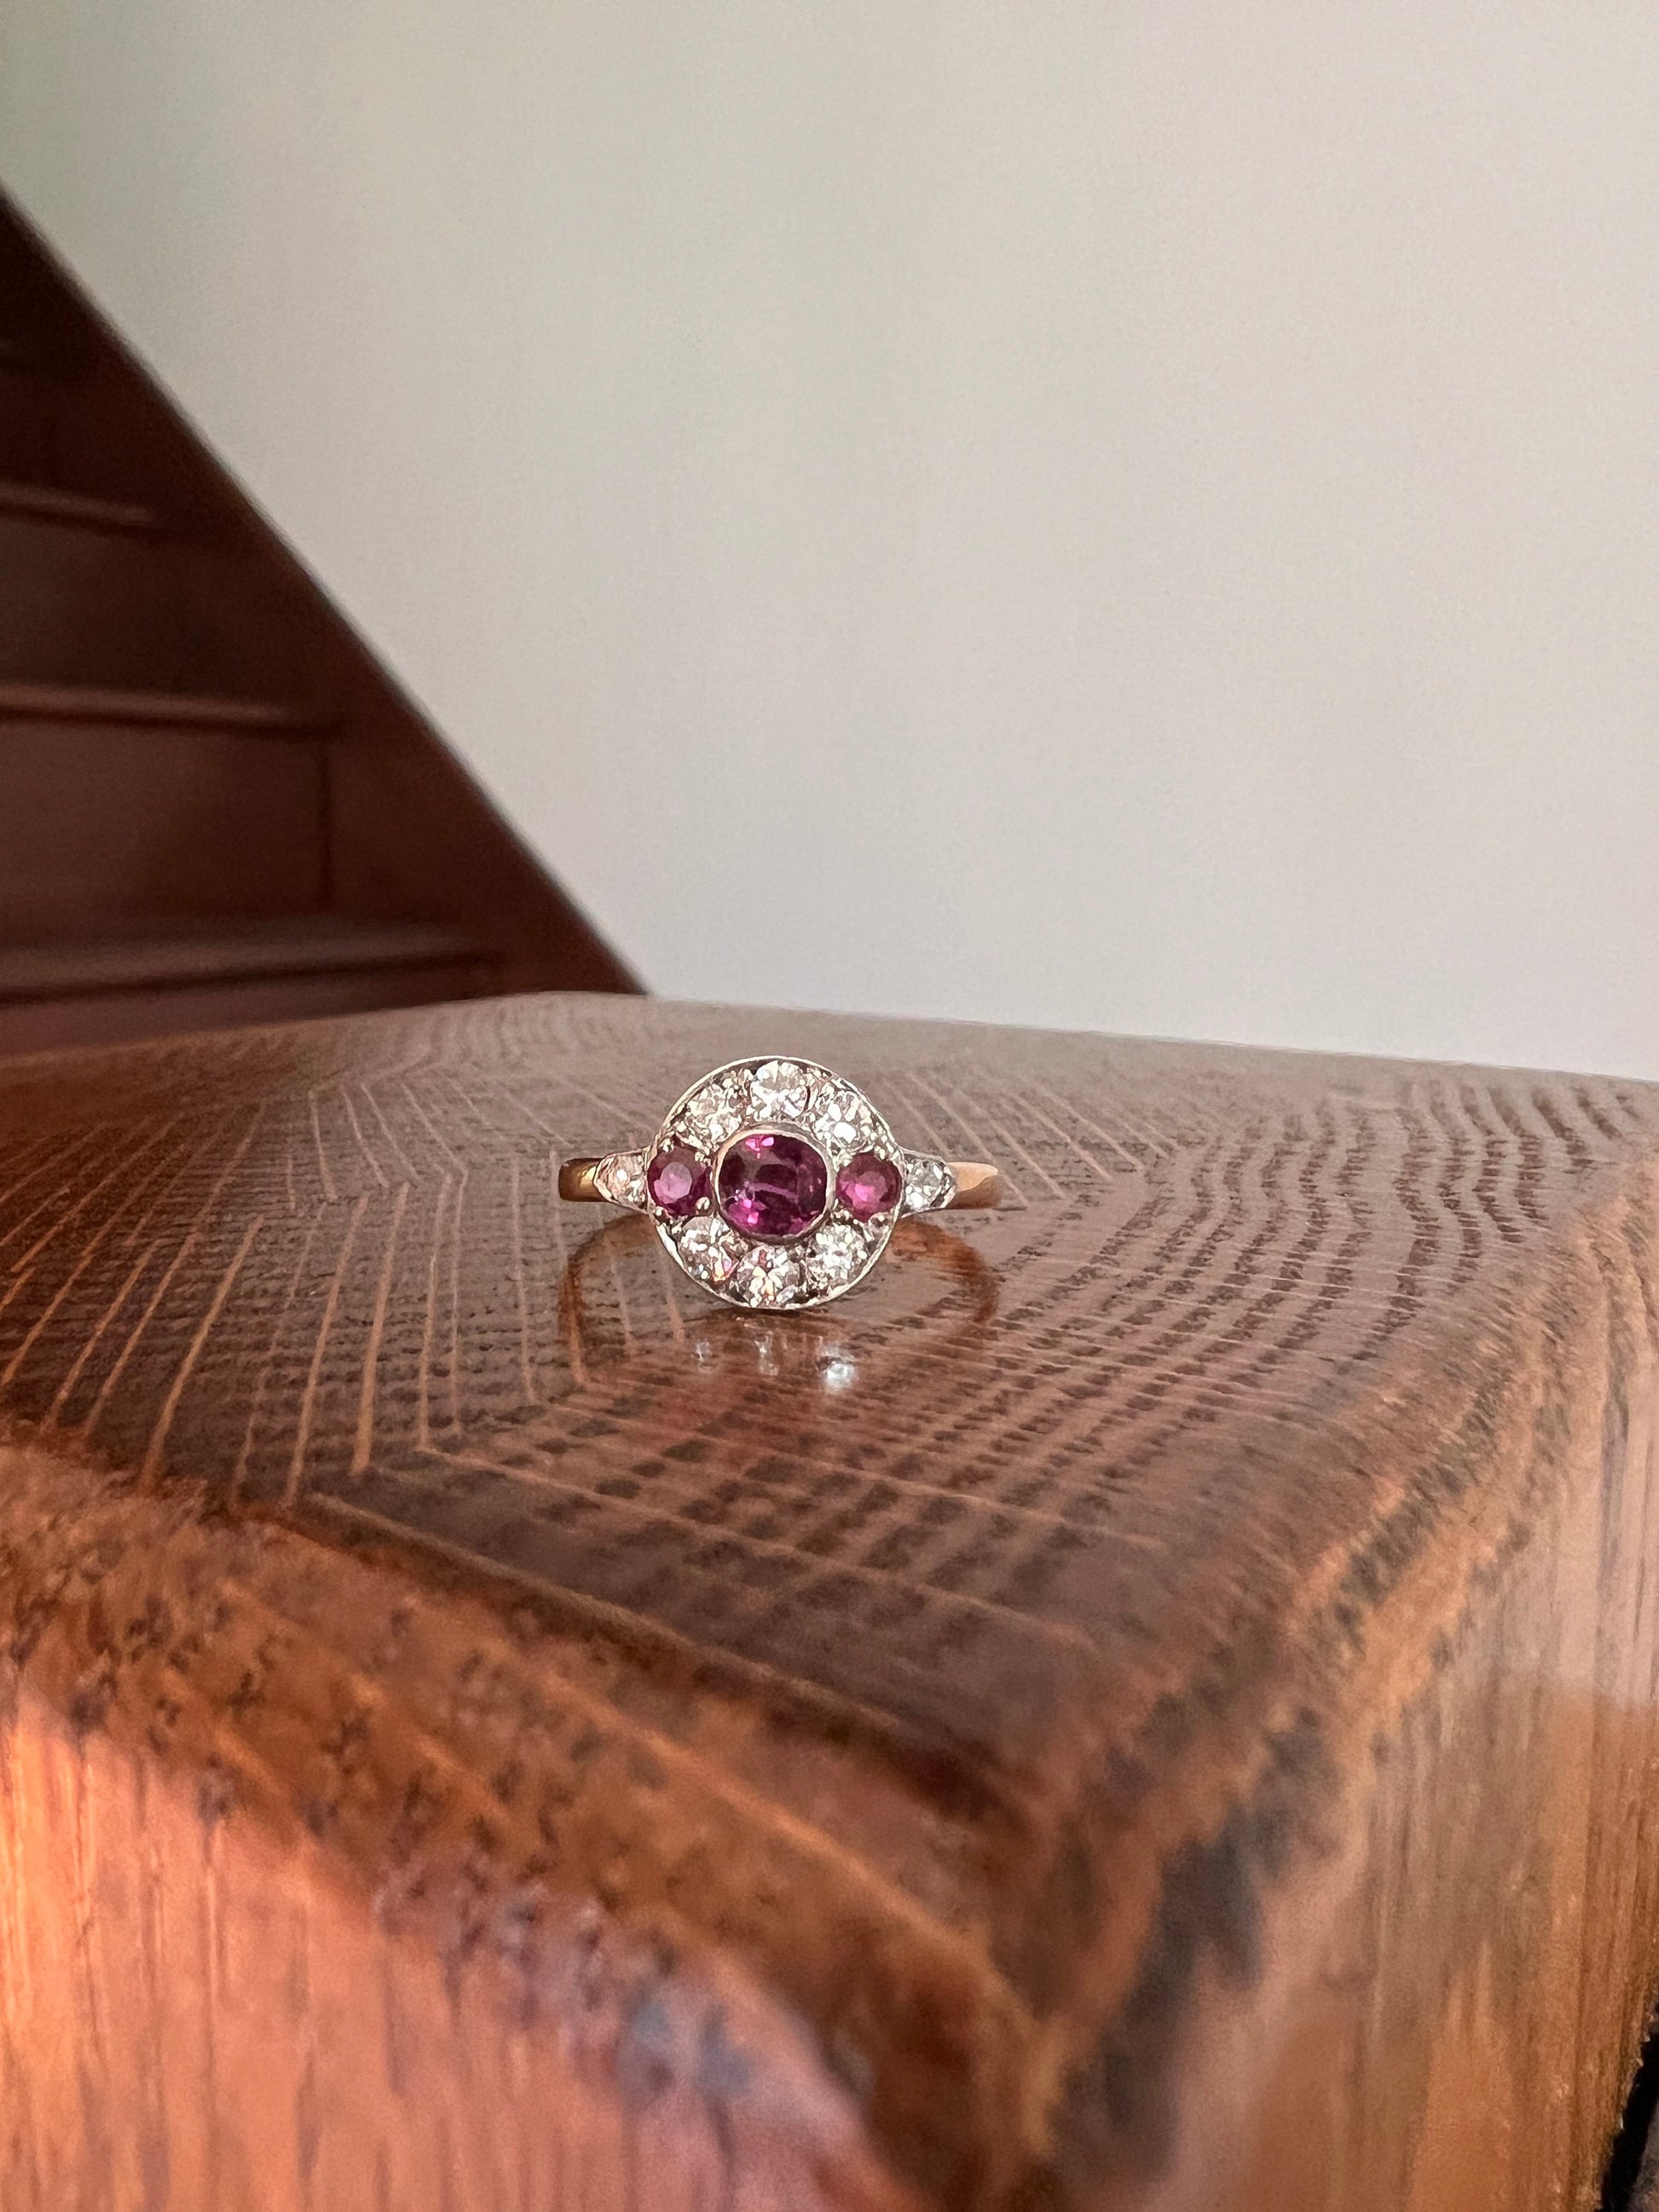 Antique RUBY Old European Cut DIAMOND Cluster Ring 18k Gold Circle Halo Stacker Linear Geometric Romantic Gift Red Mauve Pink Purple Sparkle